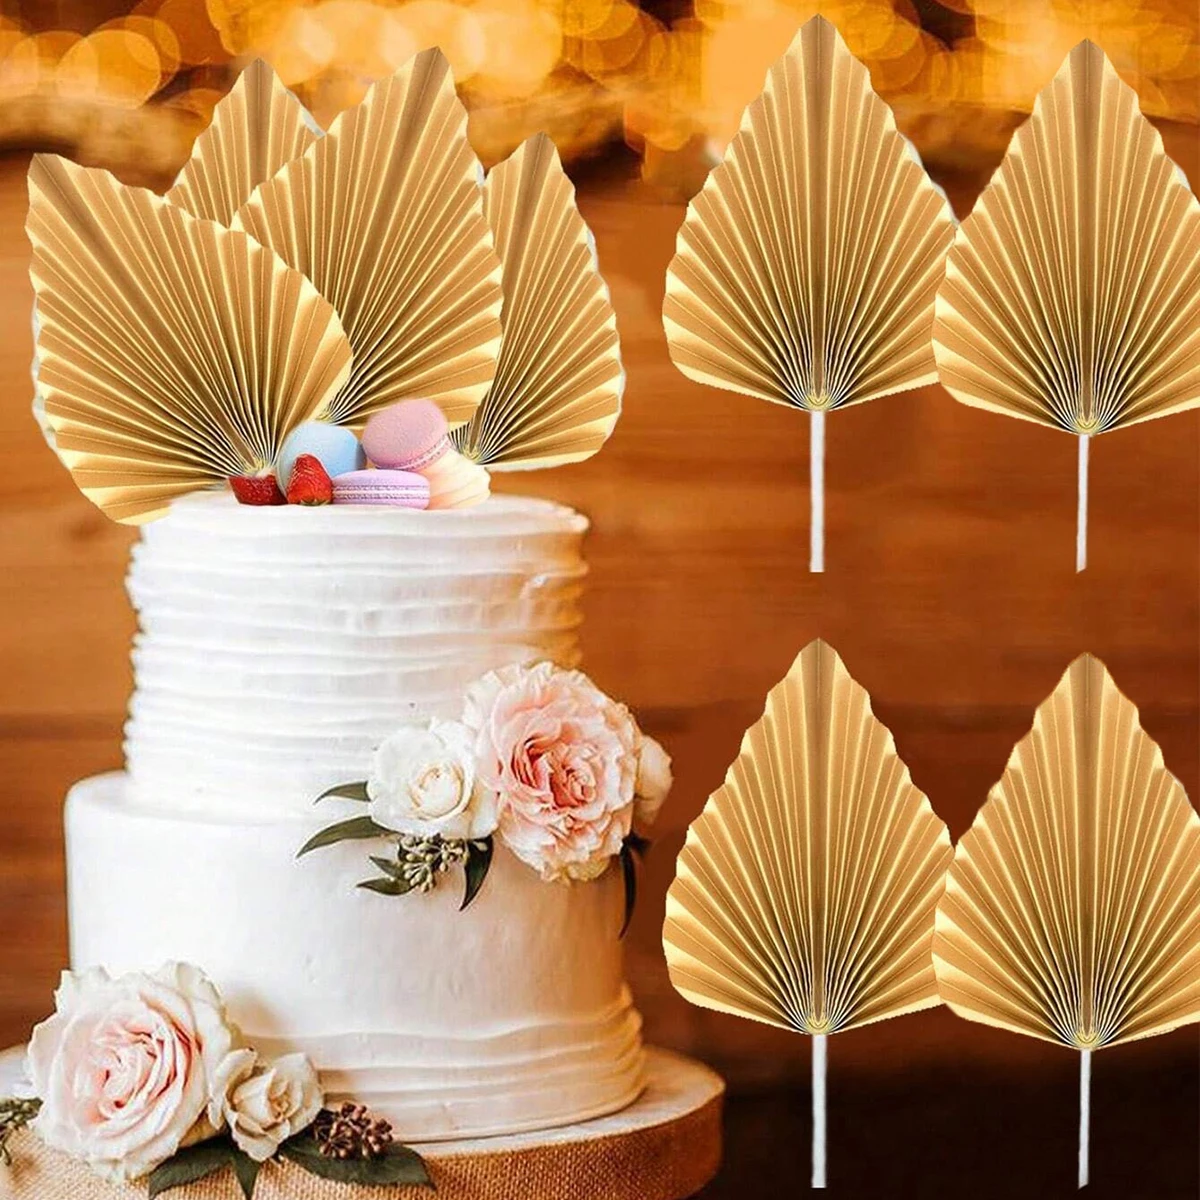 

2/4pcs Palm Spear Cake Topper Happy Birthday Golden Palm Leaf Decor Cake Decorating Wedding Baking Dessert Table Party Favors